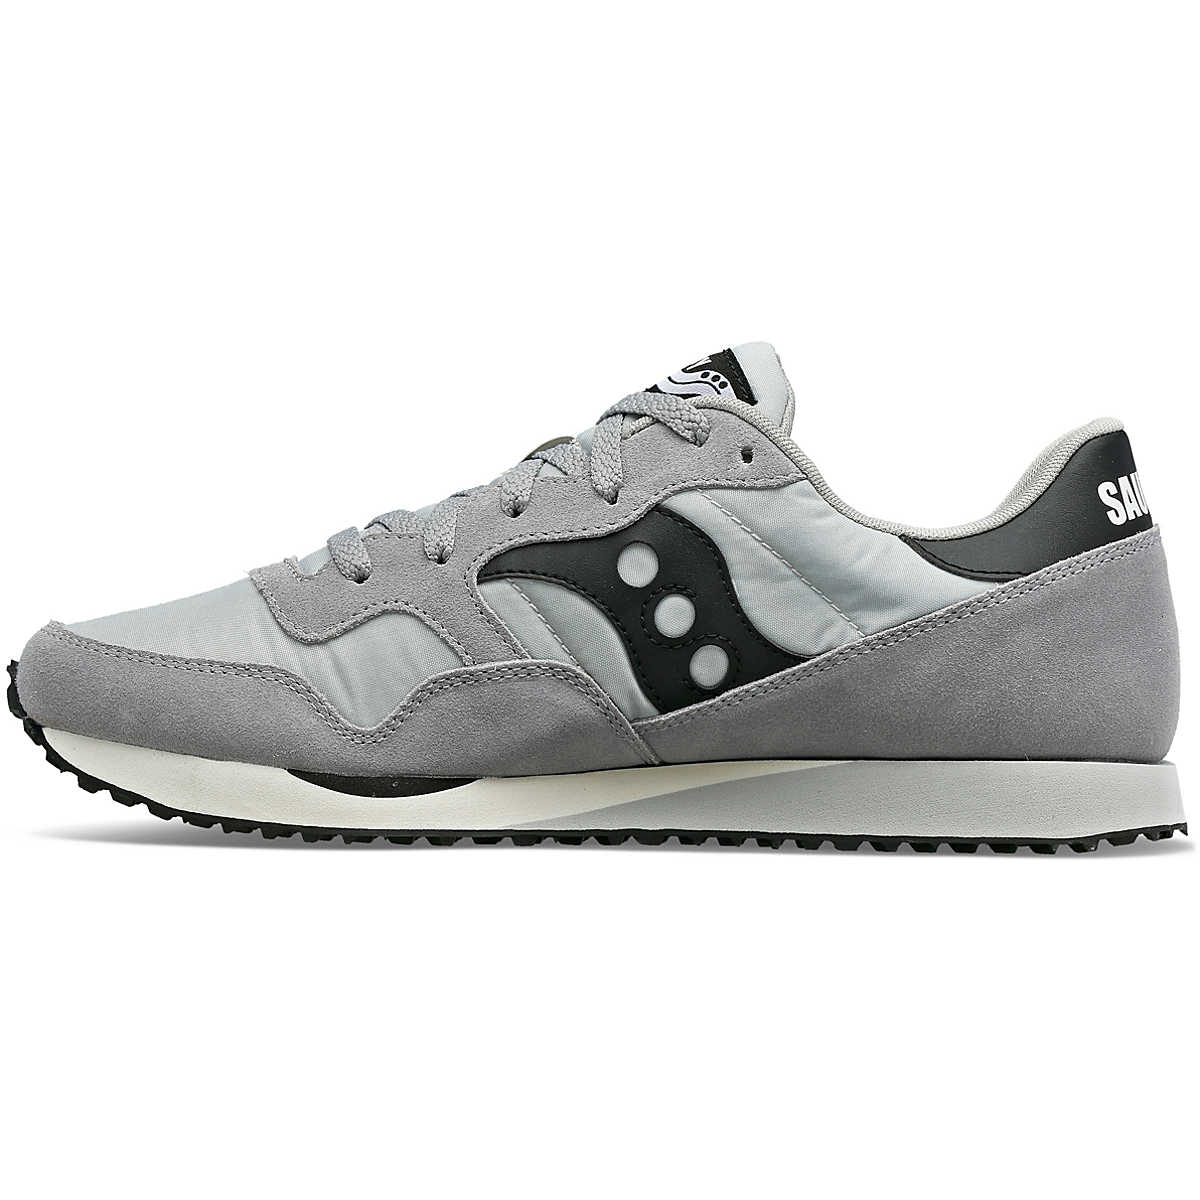 Saucony Mens DXN Trainers - Grey / Black